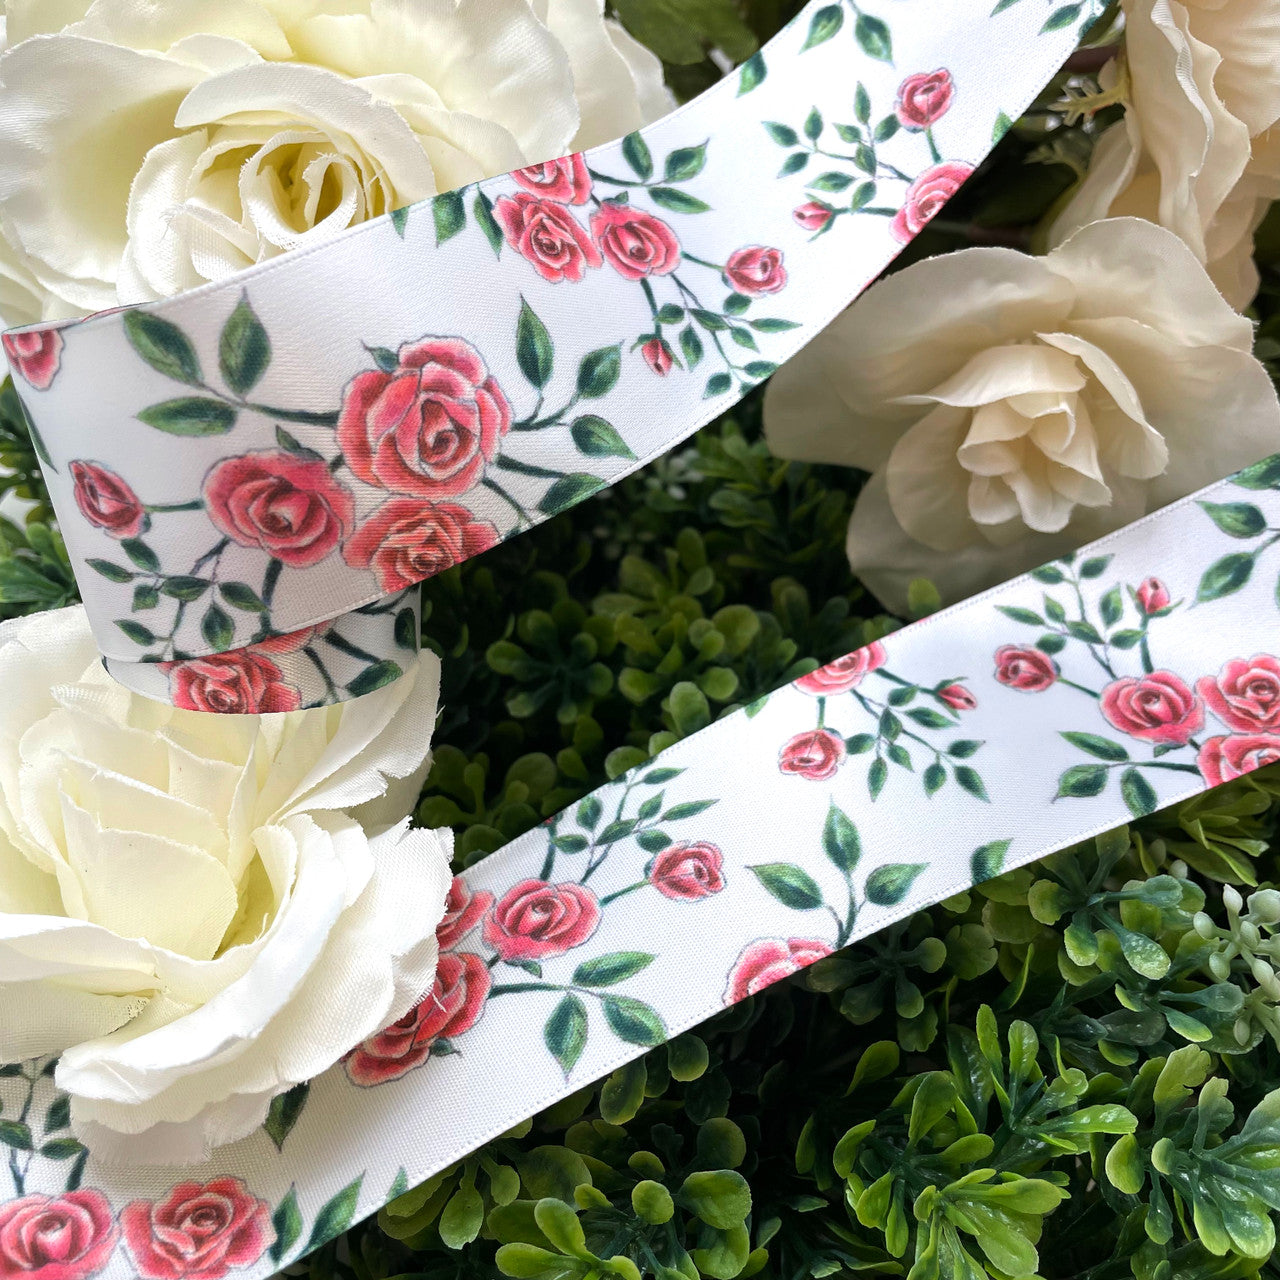 Adding this ribbon to flowers for bridal showers and wedding decor makes for extra special arrangements.